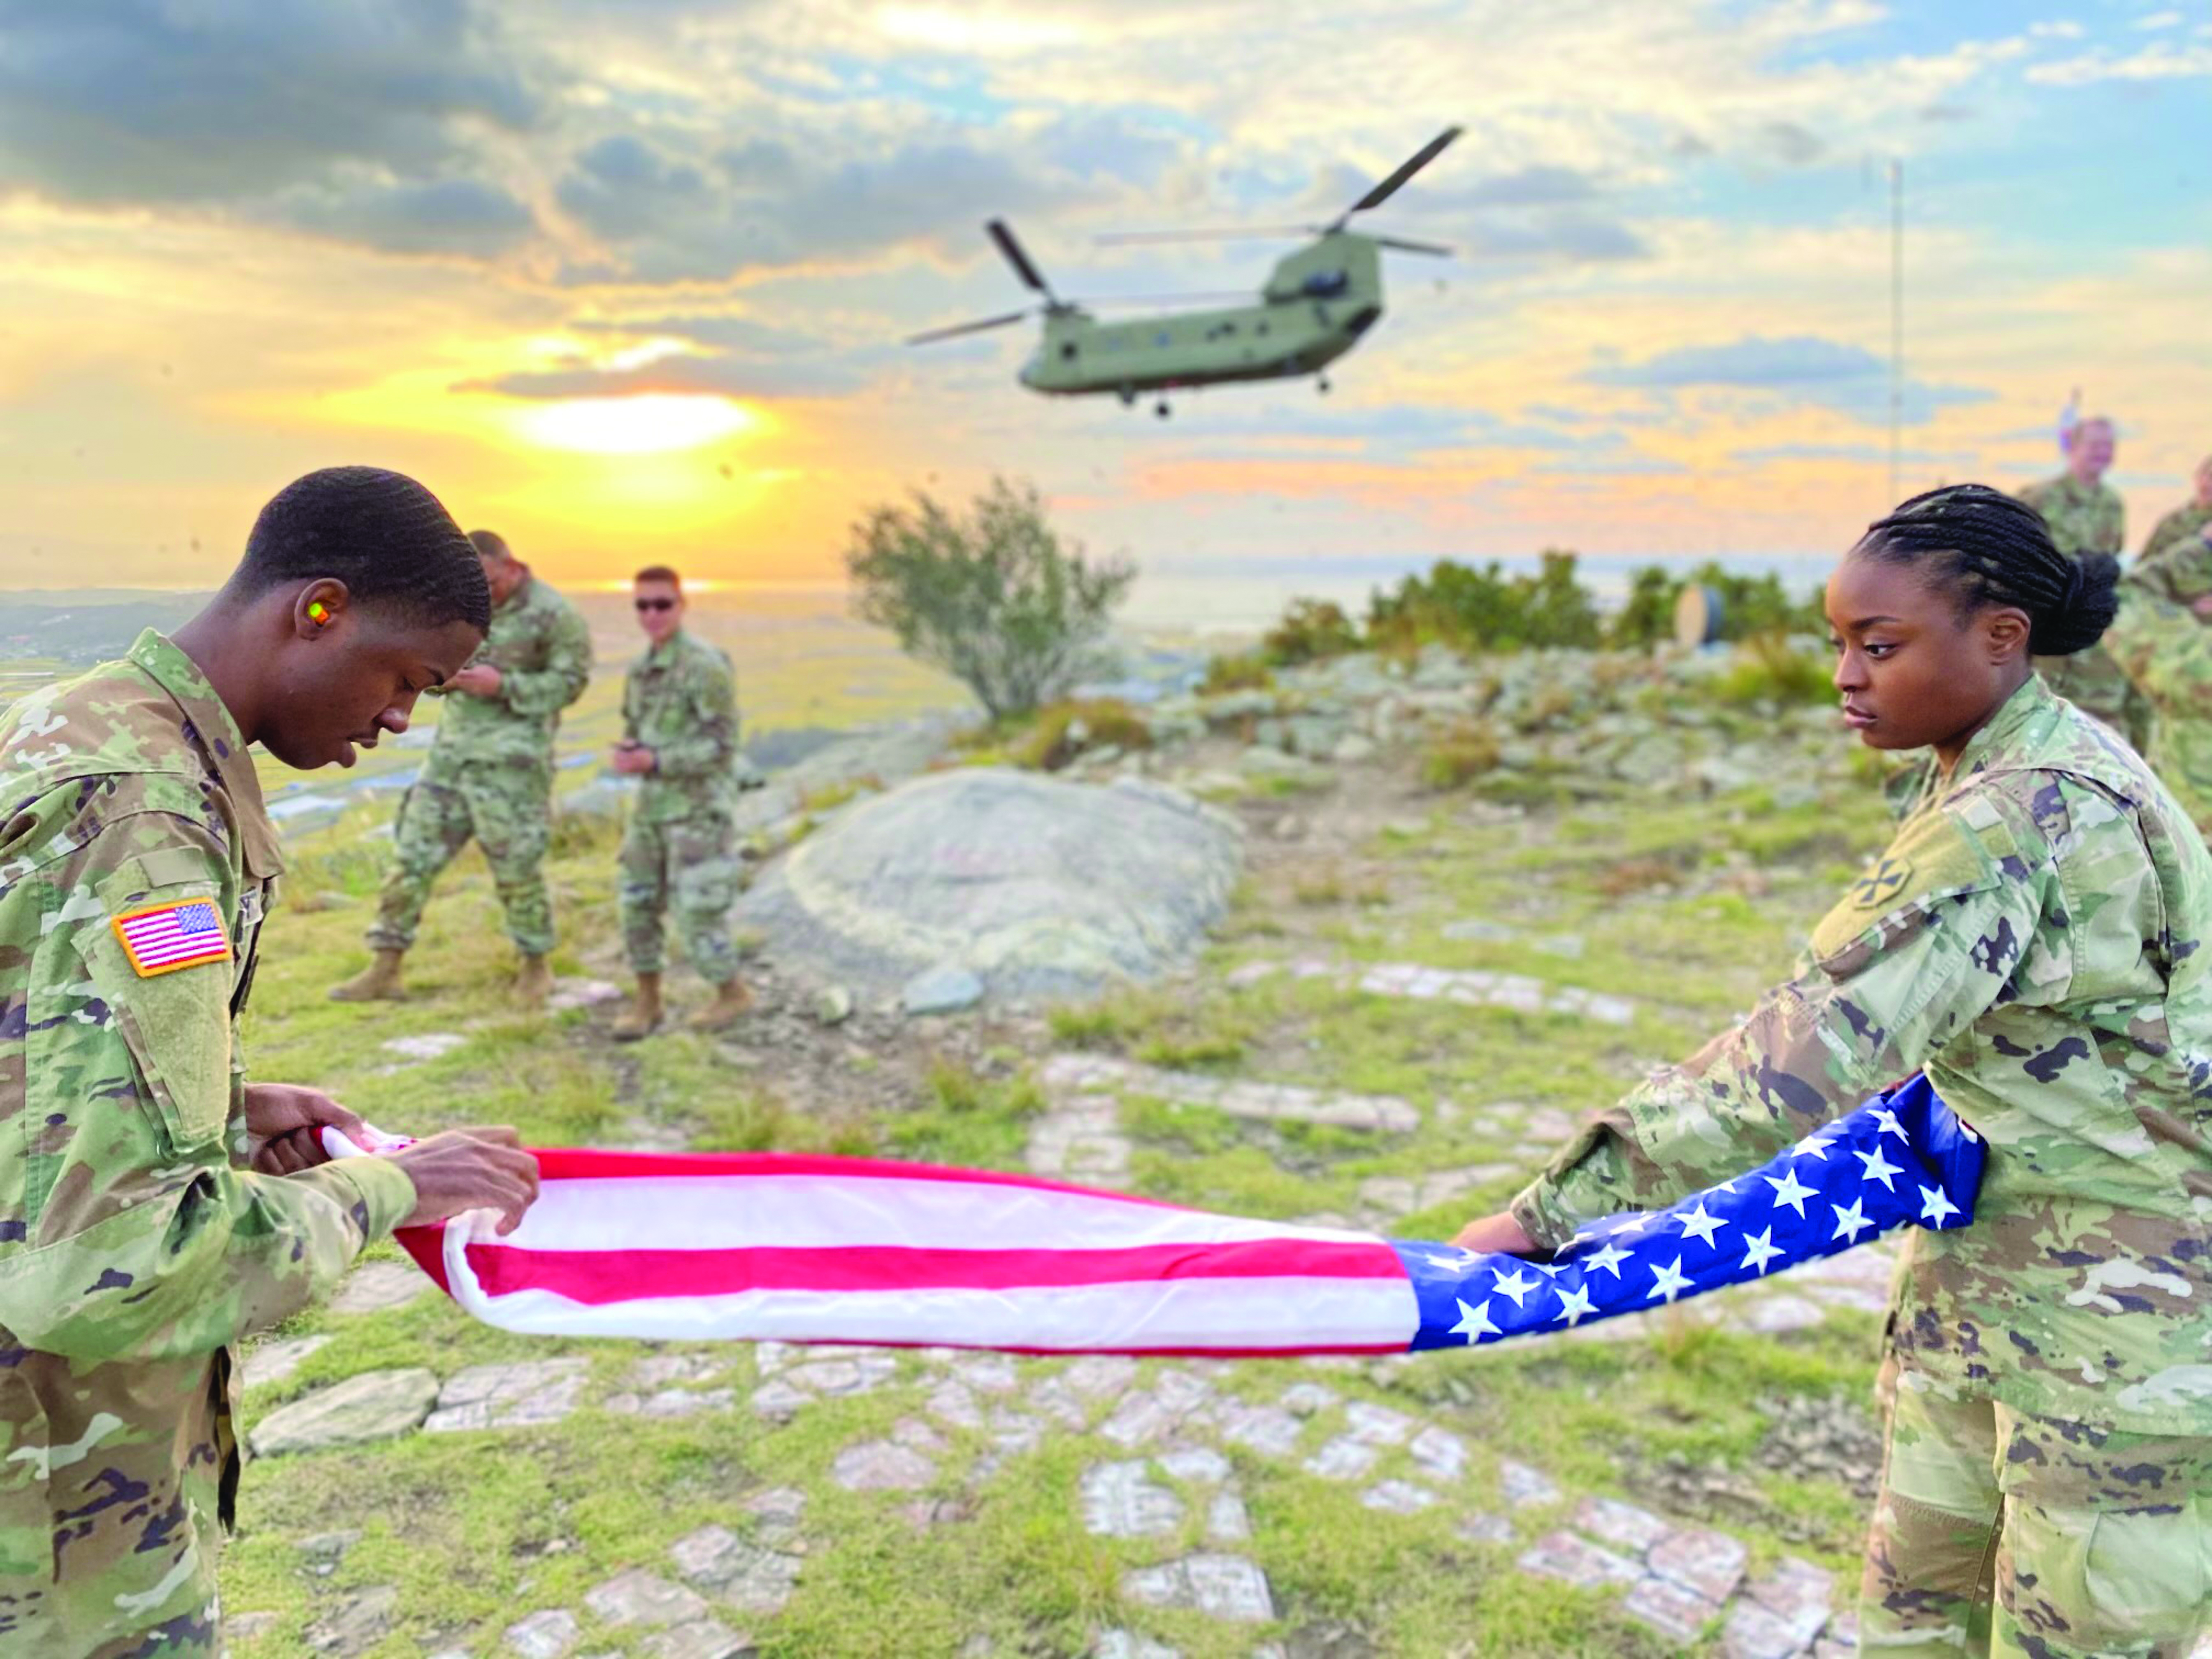 TPFC Rajea Money and PFC Josephine Embola fold the flag at the conclusion of the reenlistment of SSG Giselle Solis, NCOIC, General Crimes, Combined Eighth Army/2ID Military Justice. A CH-47 from 2 CAB flew members of the 2ID and Eighth Army OSJAs to the top of Pinnacle Four near Asan-si, Korea, to conduct the reenlistment, hovered in the background during the ceremony, and then flew back to Camp Humphreys.